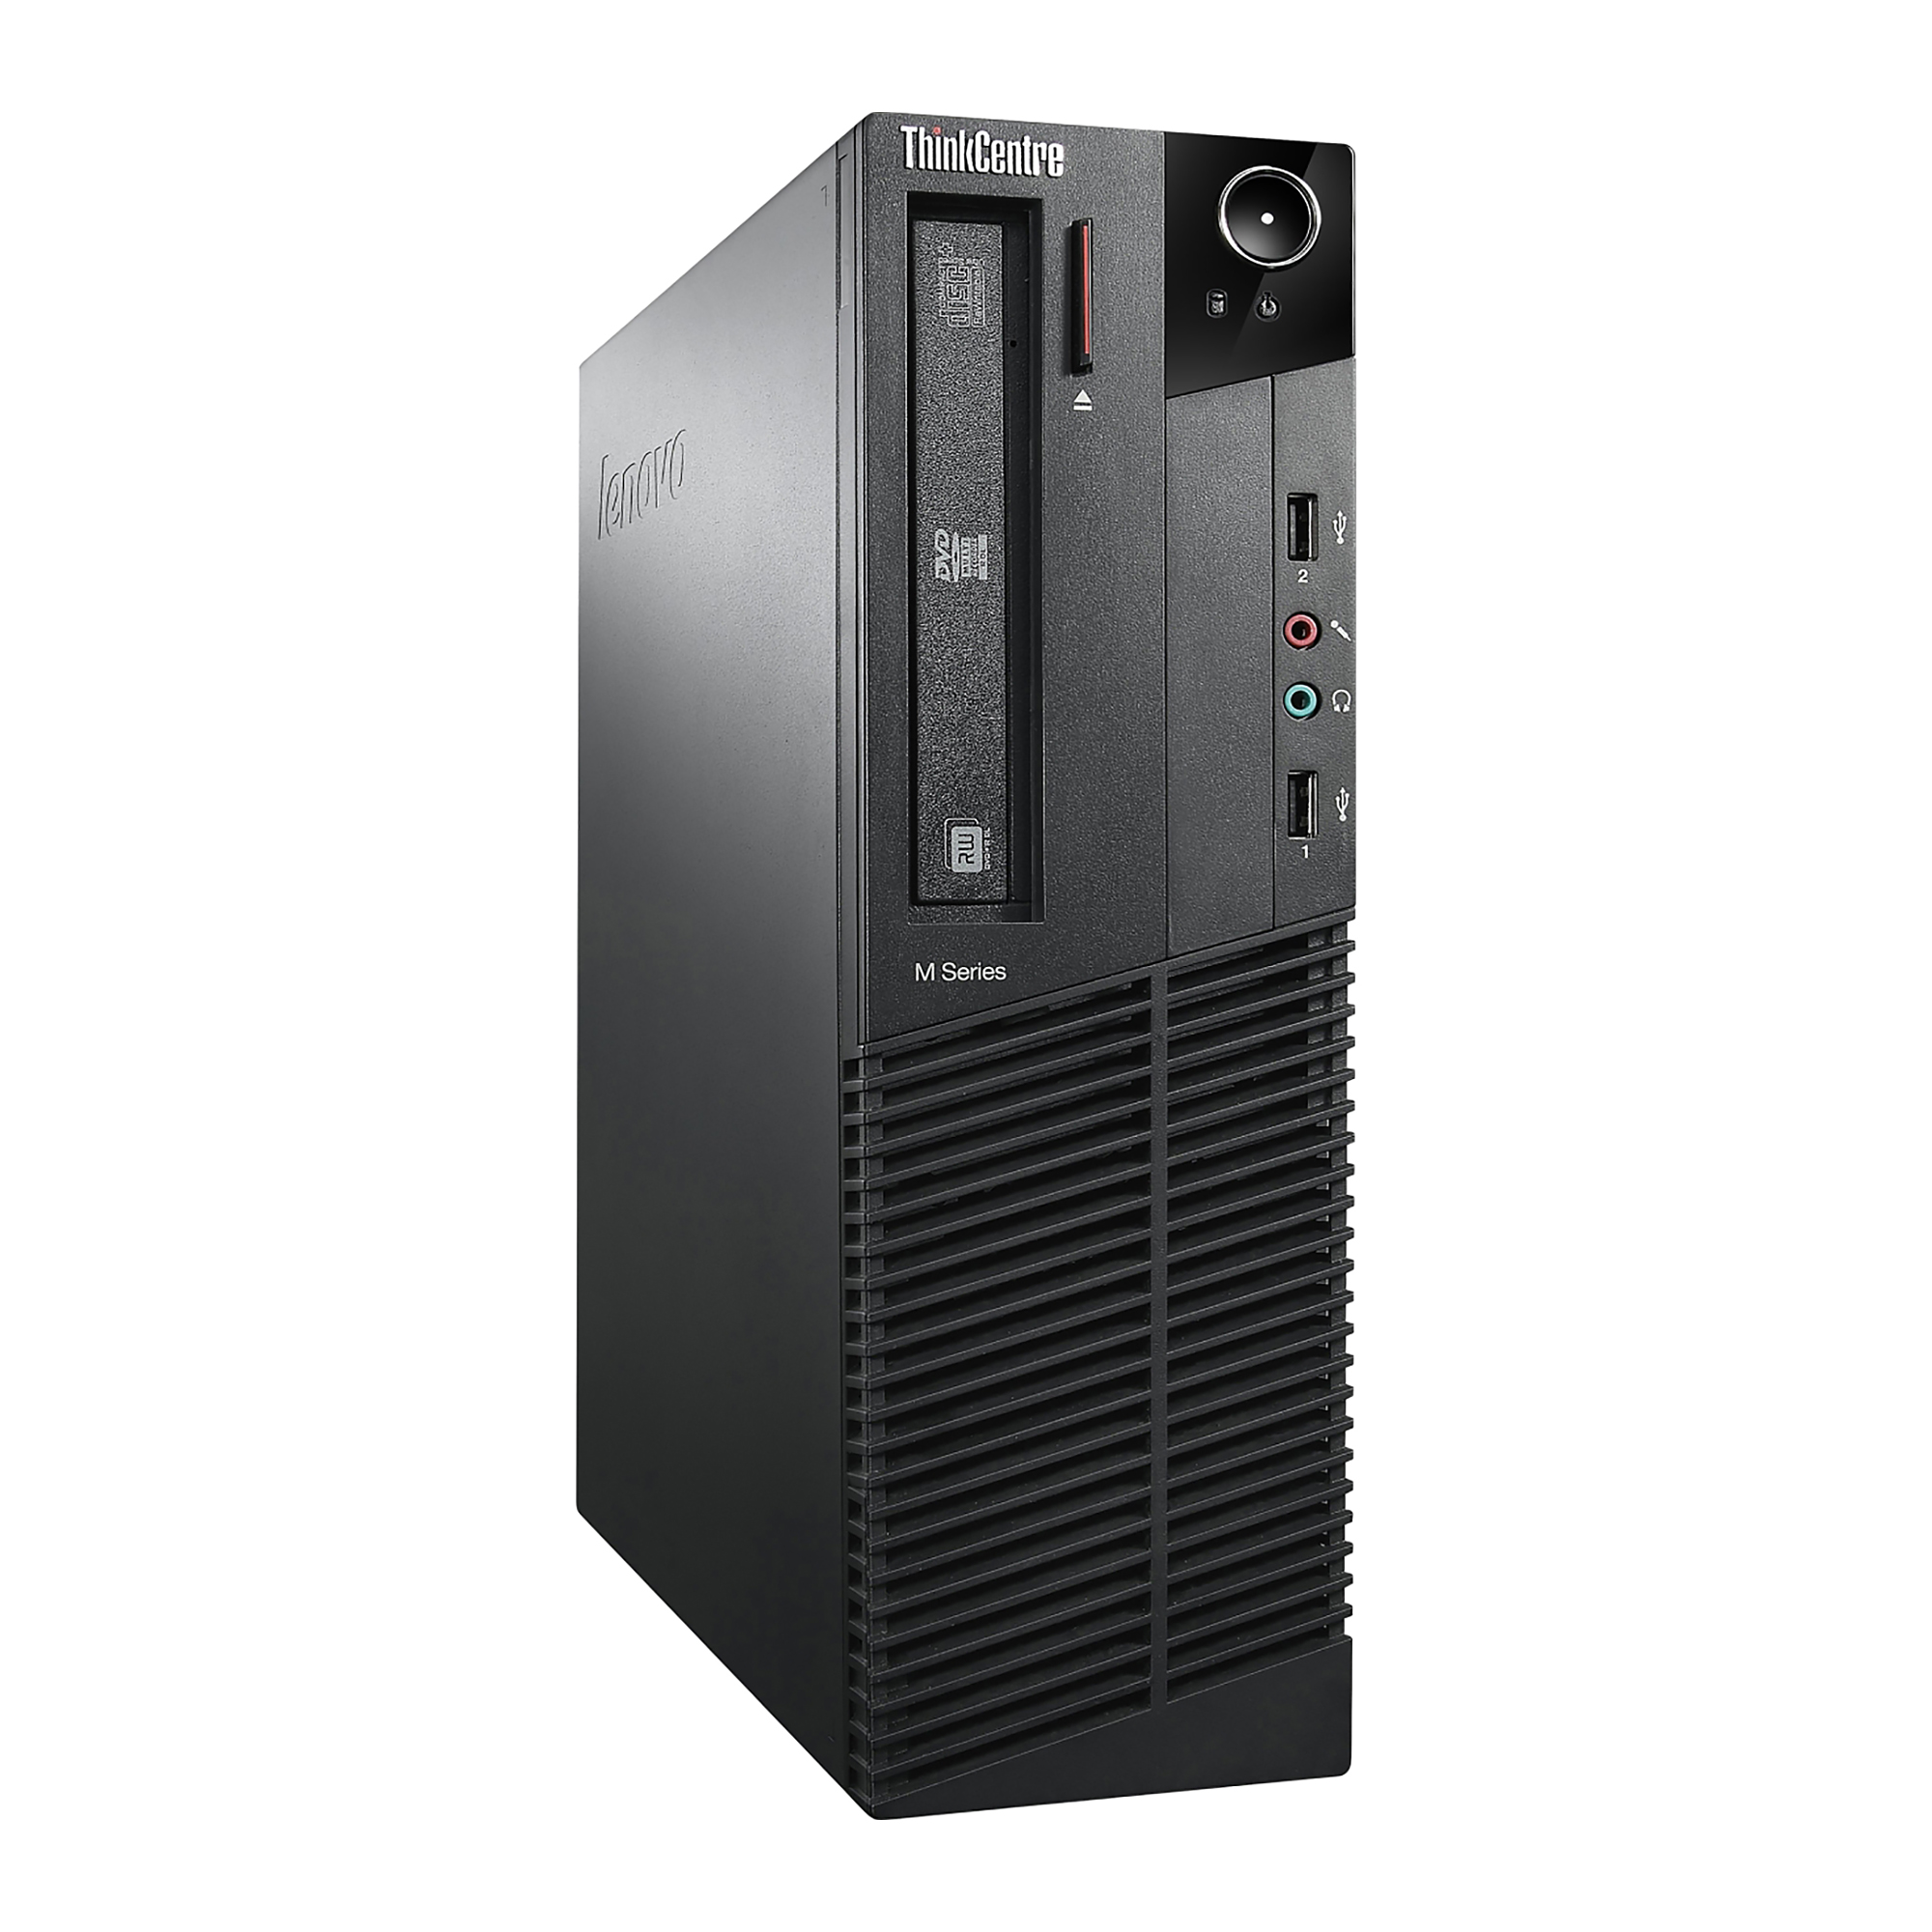 Used - Lenovo ThinkCentre M82, SFF, Intel Core i7-3770 @ 3.40 GHz, 8GB DDR3, NEW 240GB SSD, DVD-RW, Wi-Fi, VGA to HDMI Adapter, NEW Keyboard + Mouse, No OS - image 1 of 3